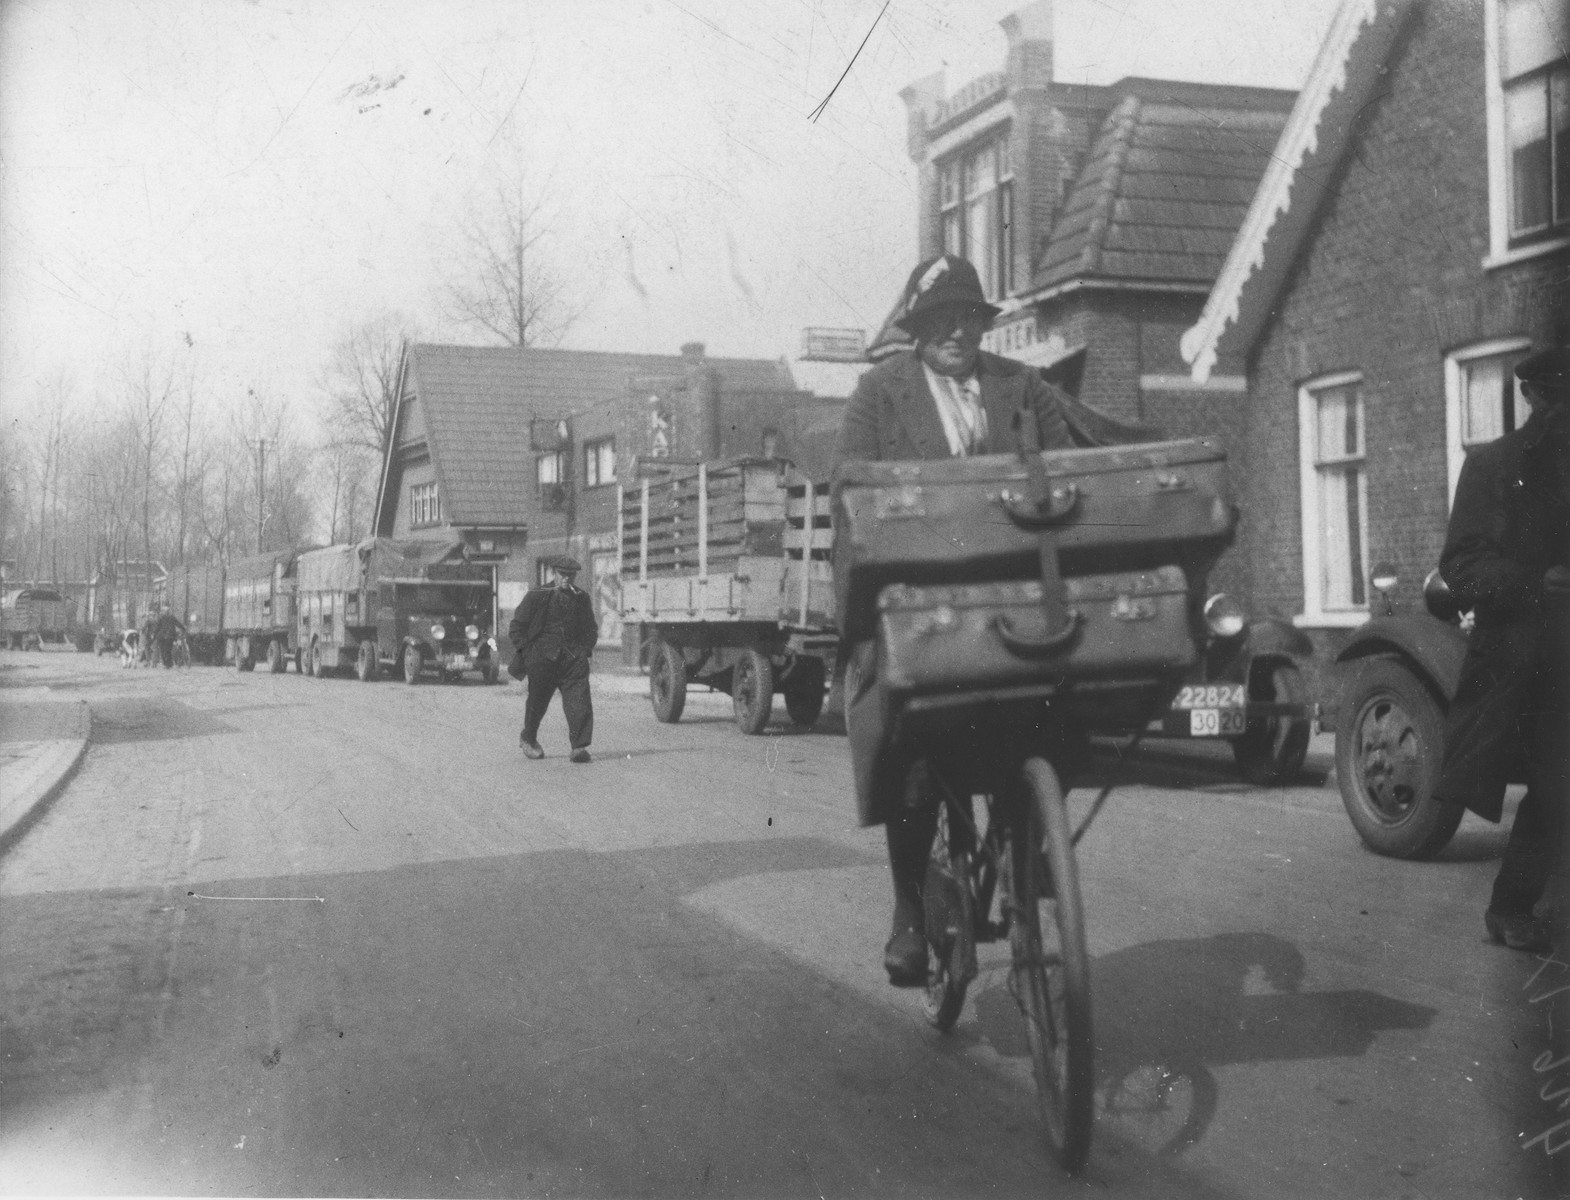 Betje Wijnberg rides a bicycle with two large suitcases.  The suitcases are filled with sewing notions that she is peddling to local farmers.

Betje Wijnberg (b. August 28, 1886) is the aunt of Selma Wijnberg.  She was deported to her death in Auschwitz on September 17, 1943.